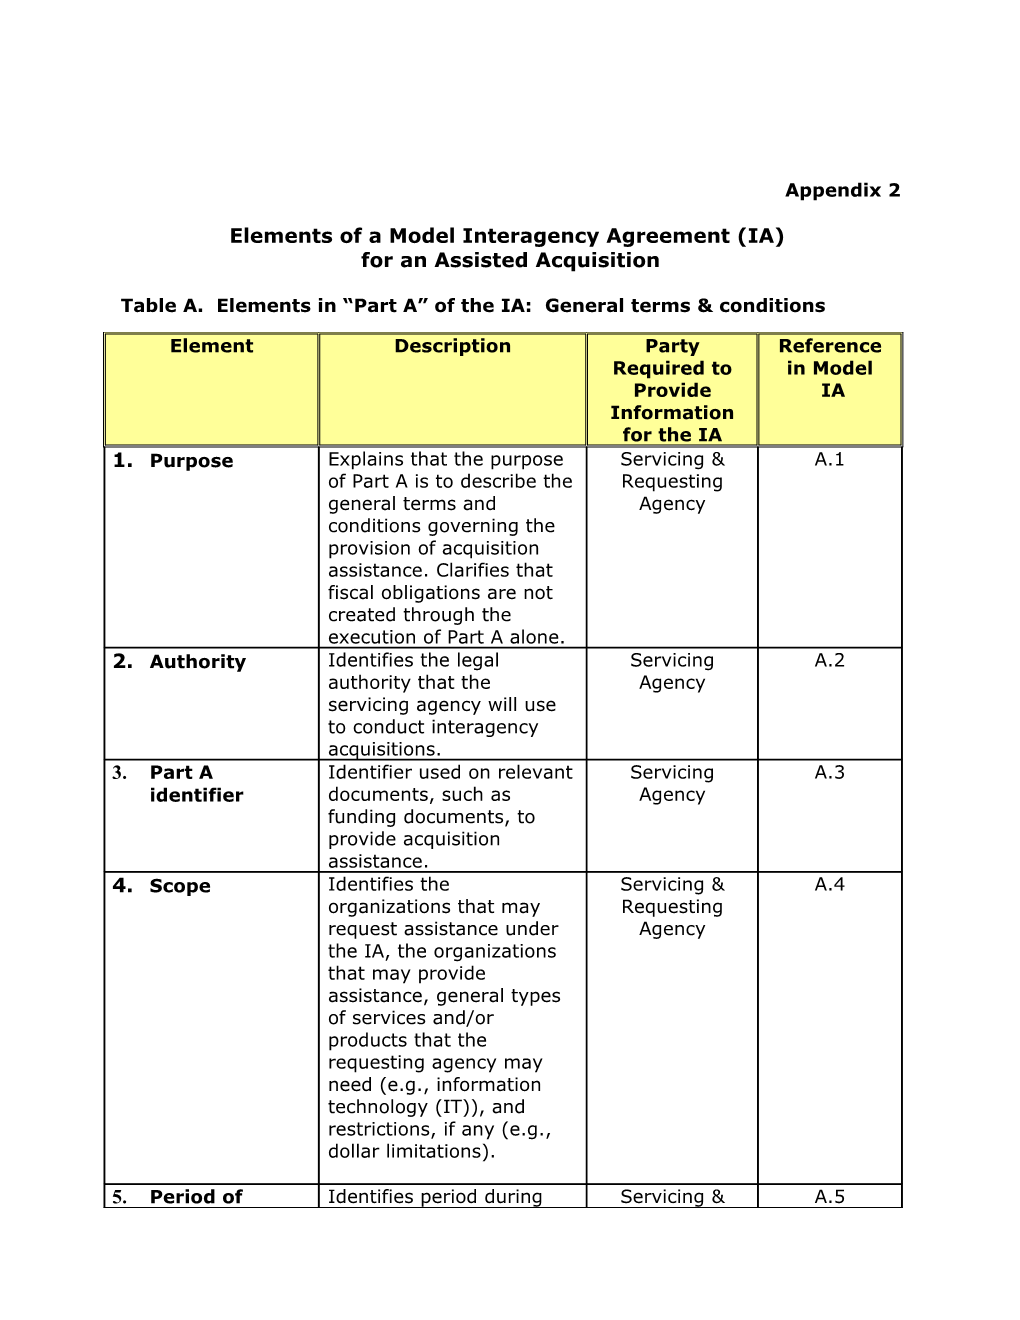 Elements of a Model Interagency Agreement (IA)